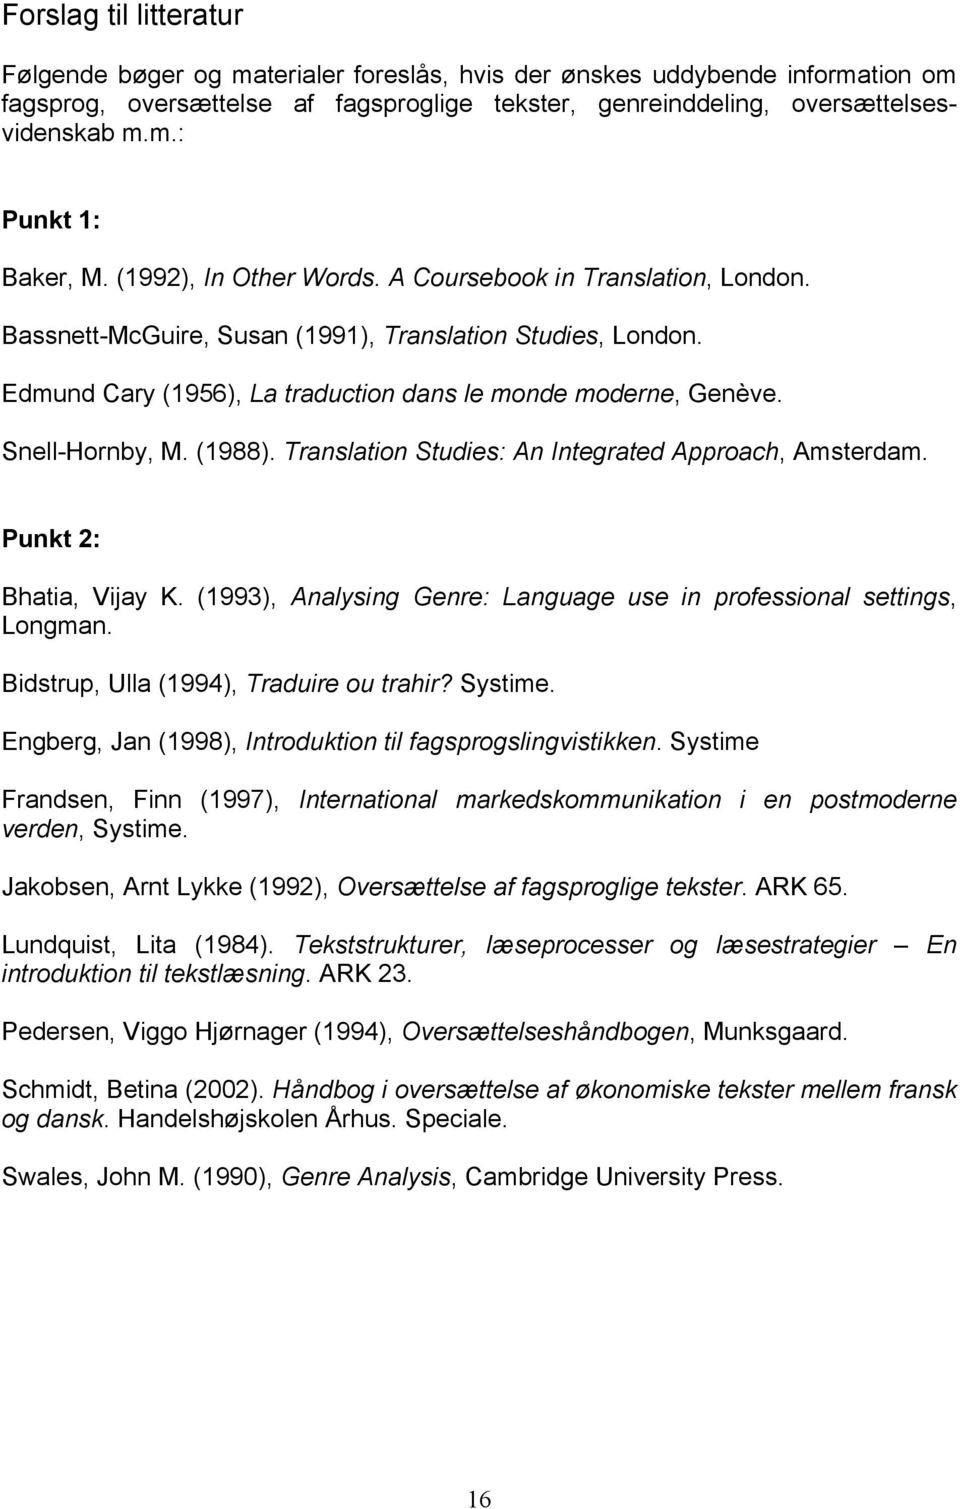 Snell-Hornby, M. (1988). Translation Studies: An Integrated Approach, Amsterdam. Punkt 2: Bhatia, Vijay K. (1993), Analysing Genre: Language use in professional settings, Longman.